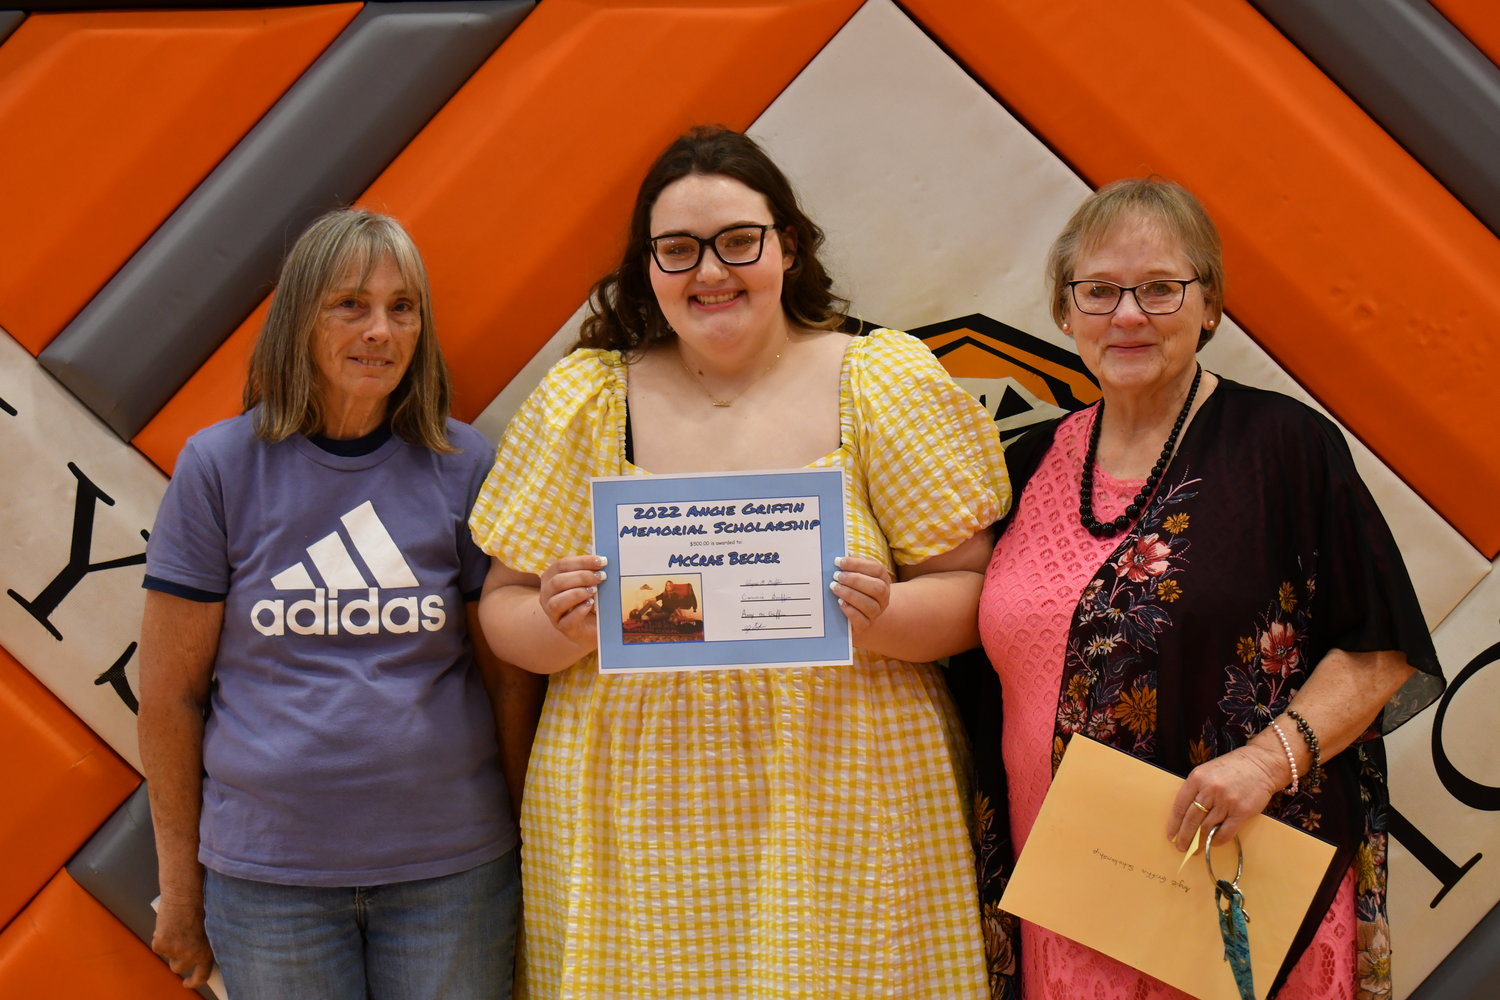 Senior Awards — McCrae Becker was given the Angie Friffin Award by Connie Griffin and Tamra Rundell on Friday, May 13, 2022.